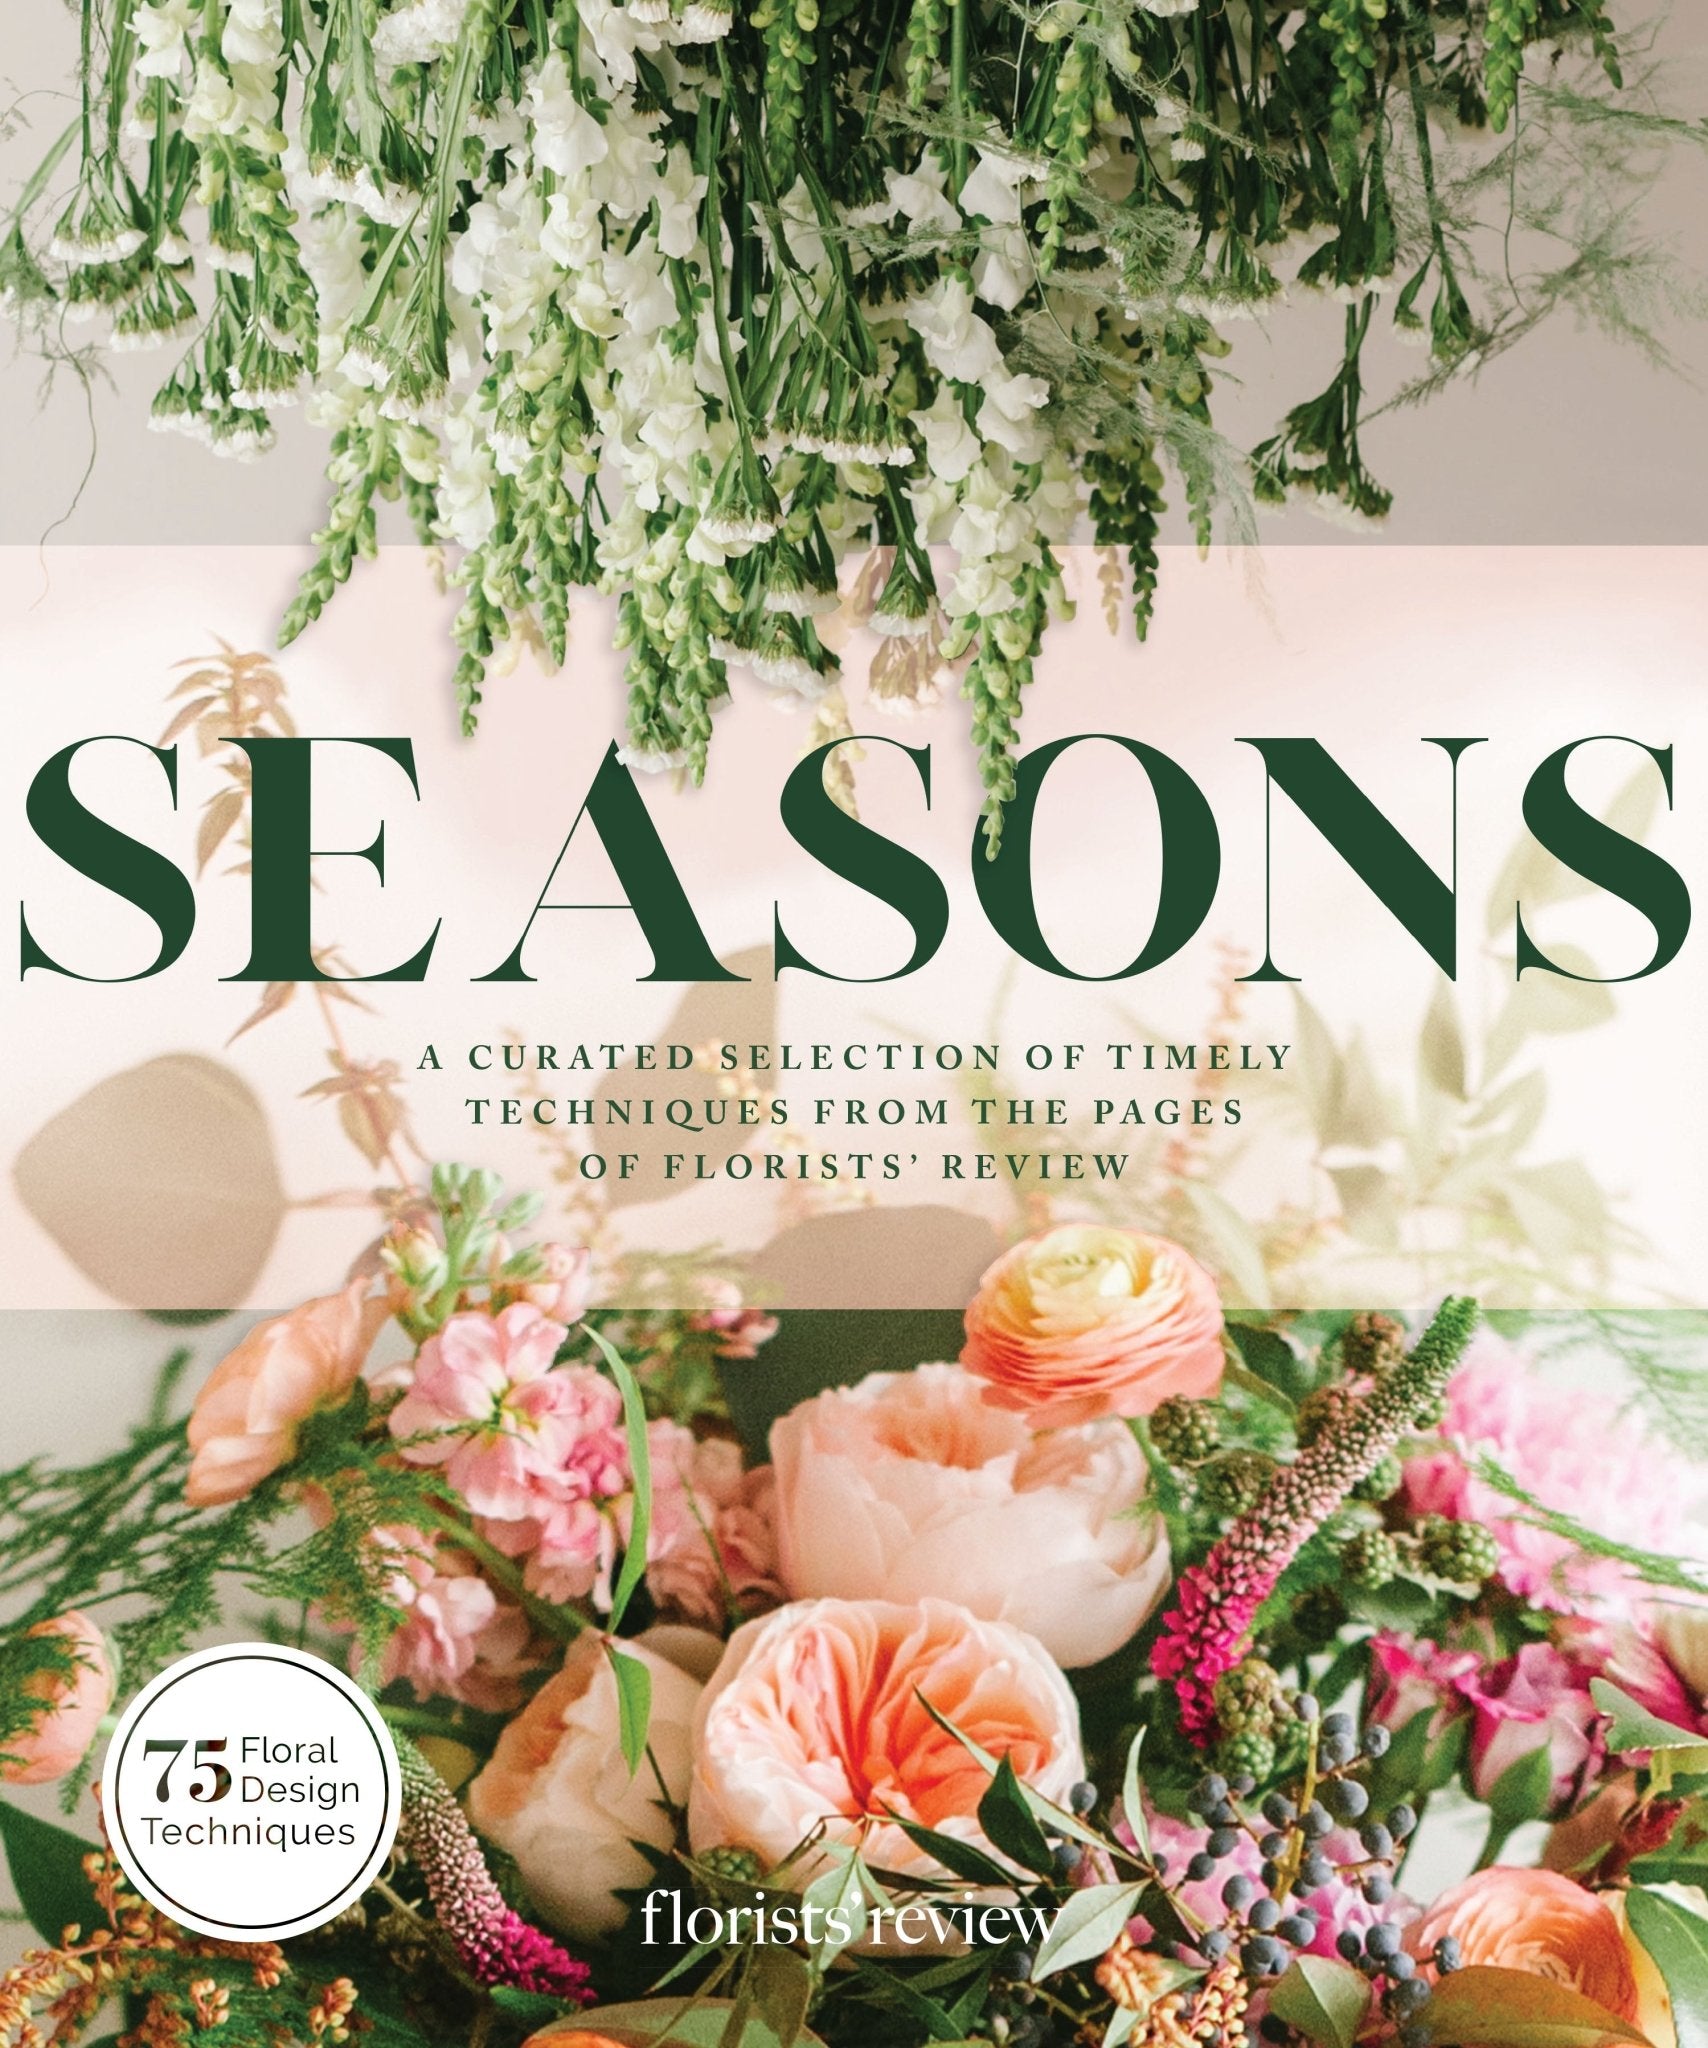 Seasonal Publisher's Pack - Five of Our Best-Selling Seasonal Floral Design Books - One Great Price! - WildFlower Media